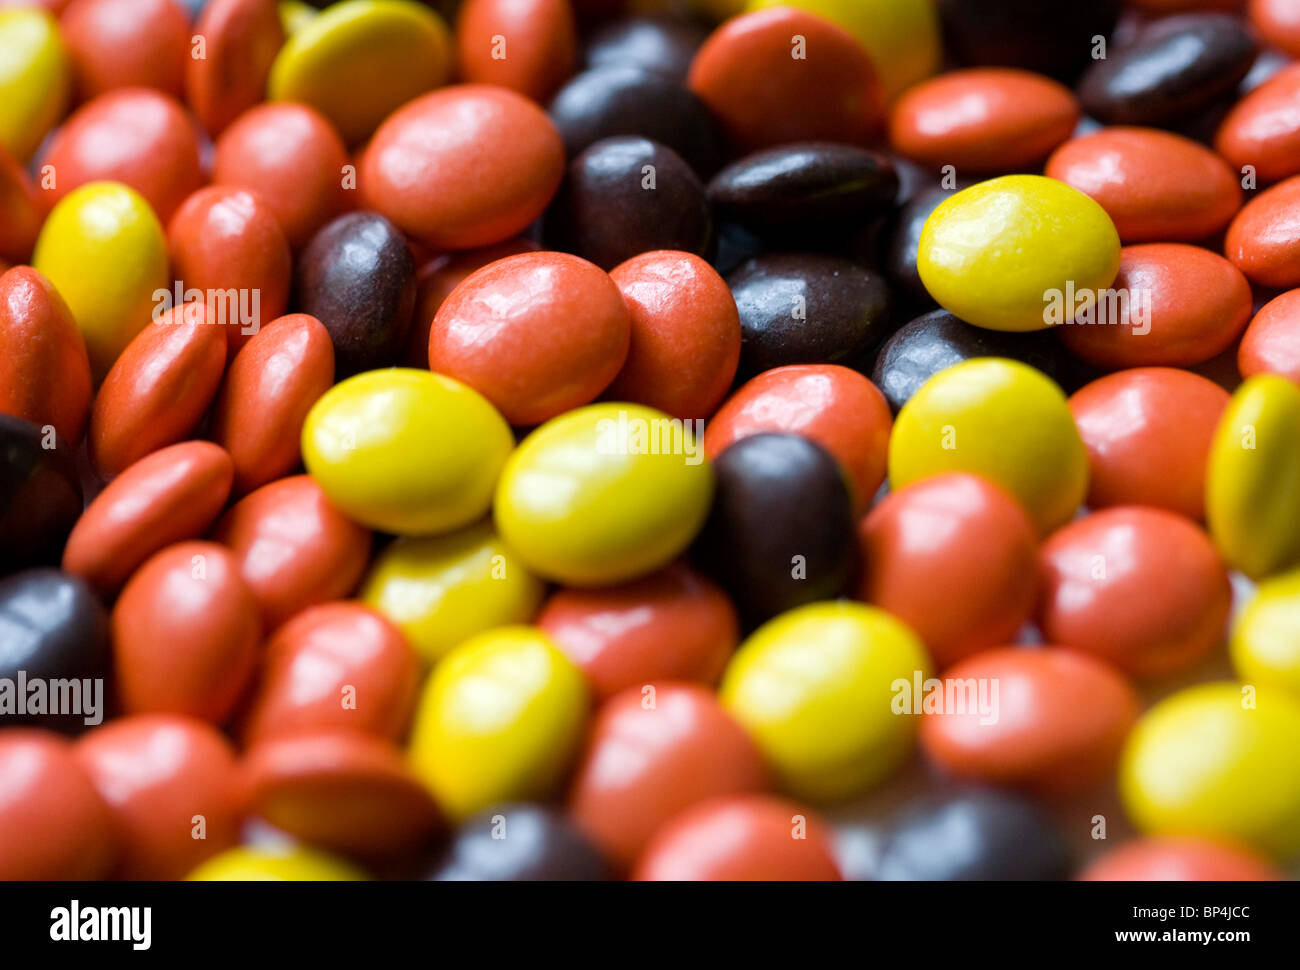 Reese's Pieces candies. Stock Photo